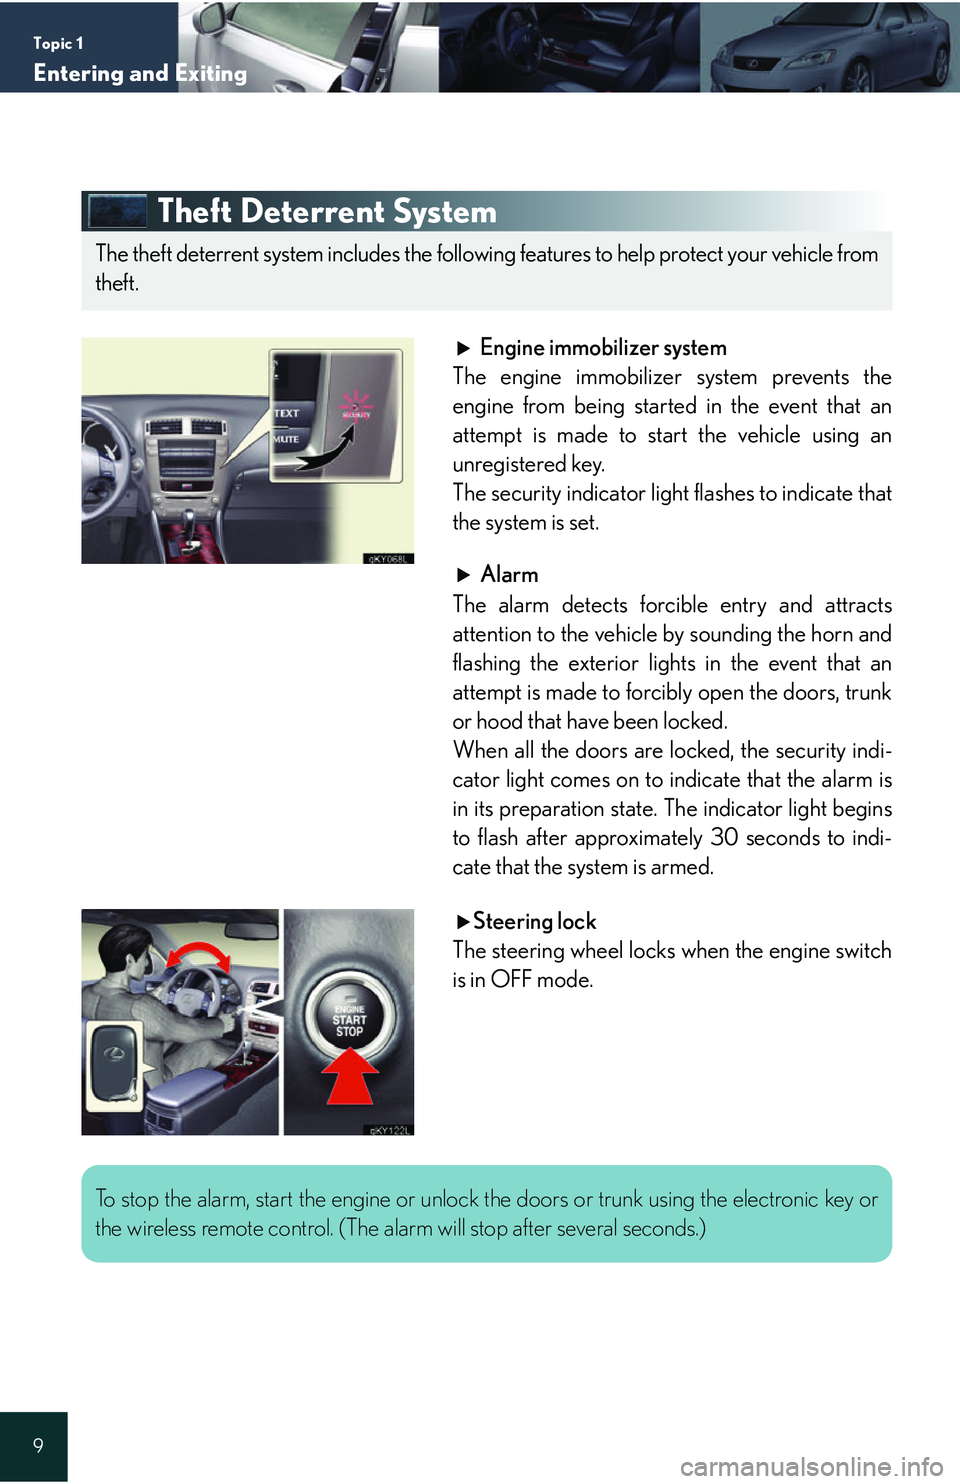 Lexus IS250 2006  Do-it-yourself maintenance / LEXUS 2006 IS350/250 QUICK REFERENCE GUIDE Topic 1
Entering and Exiting
9
Theft Deterrent System
Engine immobilizer system
The engine immobilizer system prevents the
engine from being started in the event that an
attempt is made to start the v